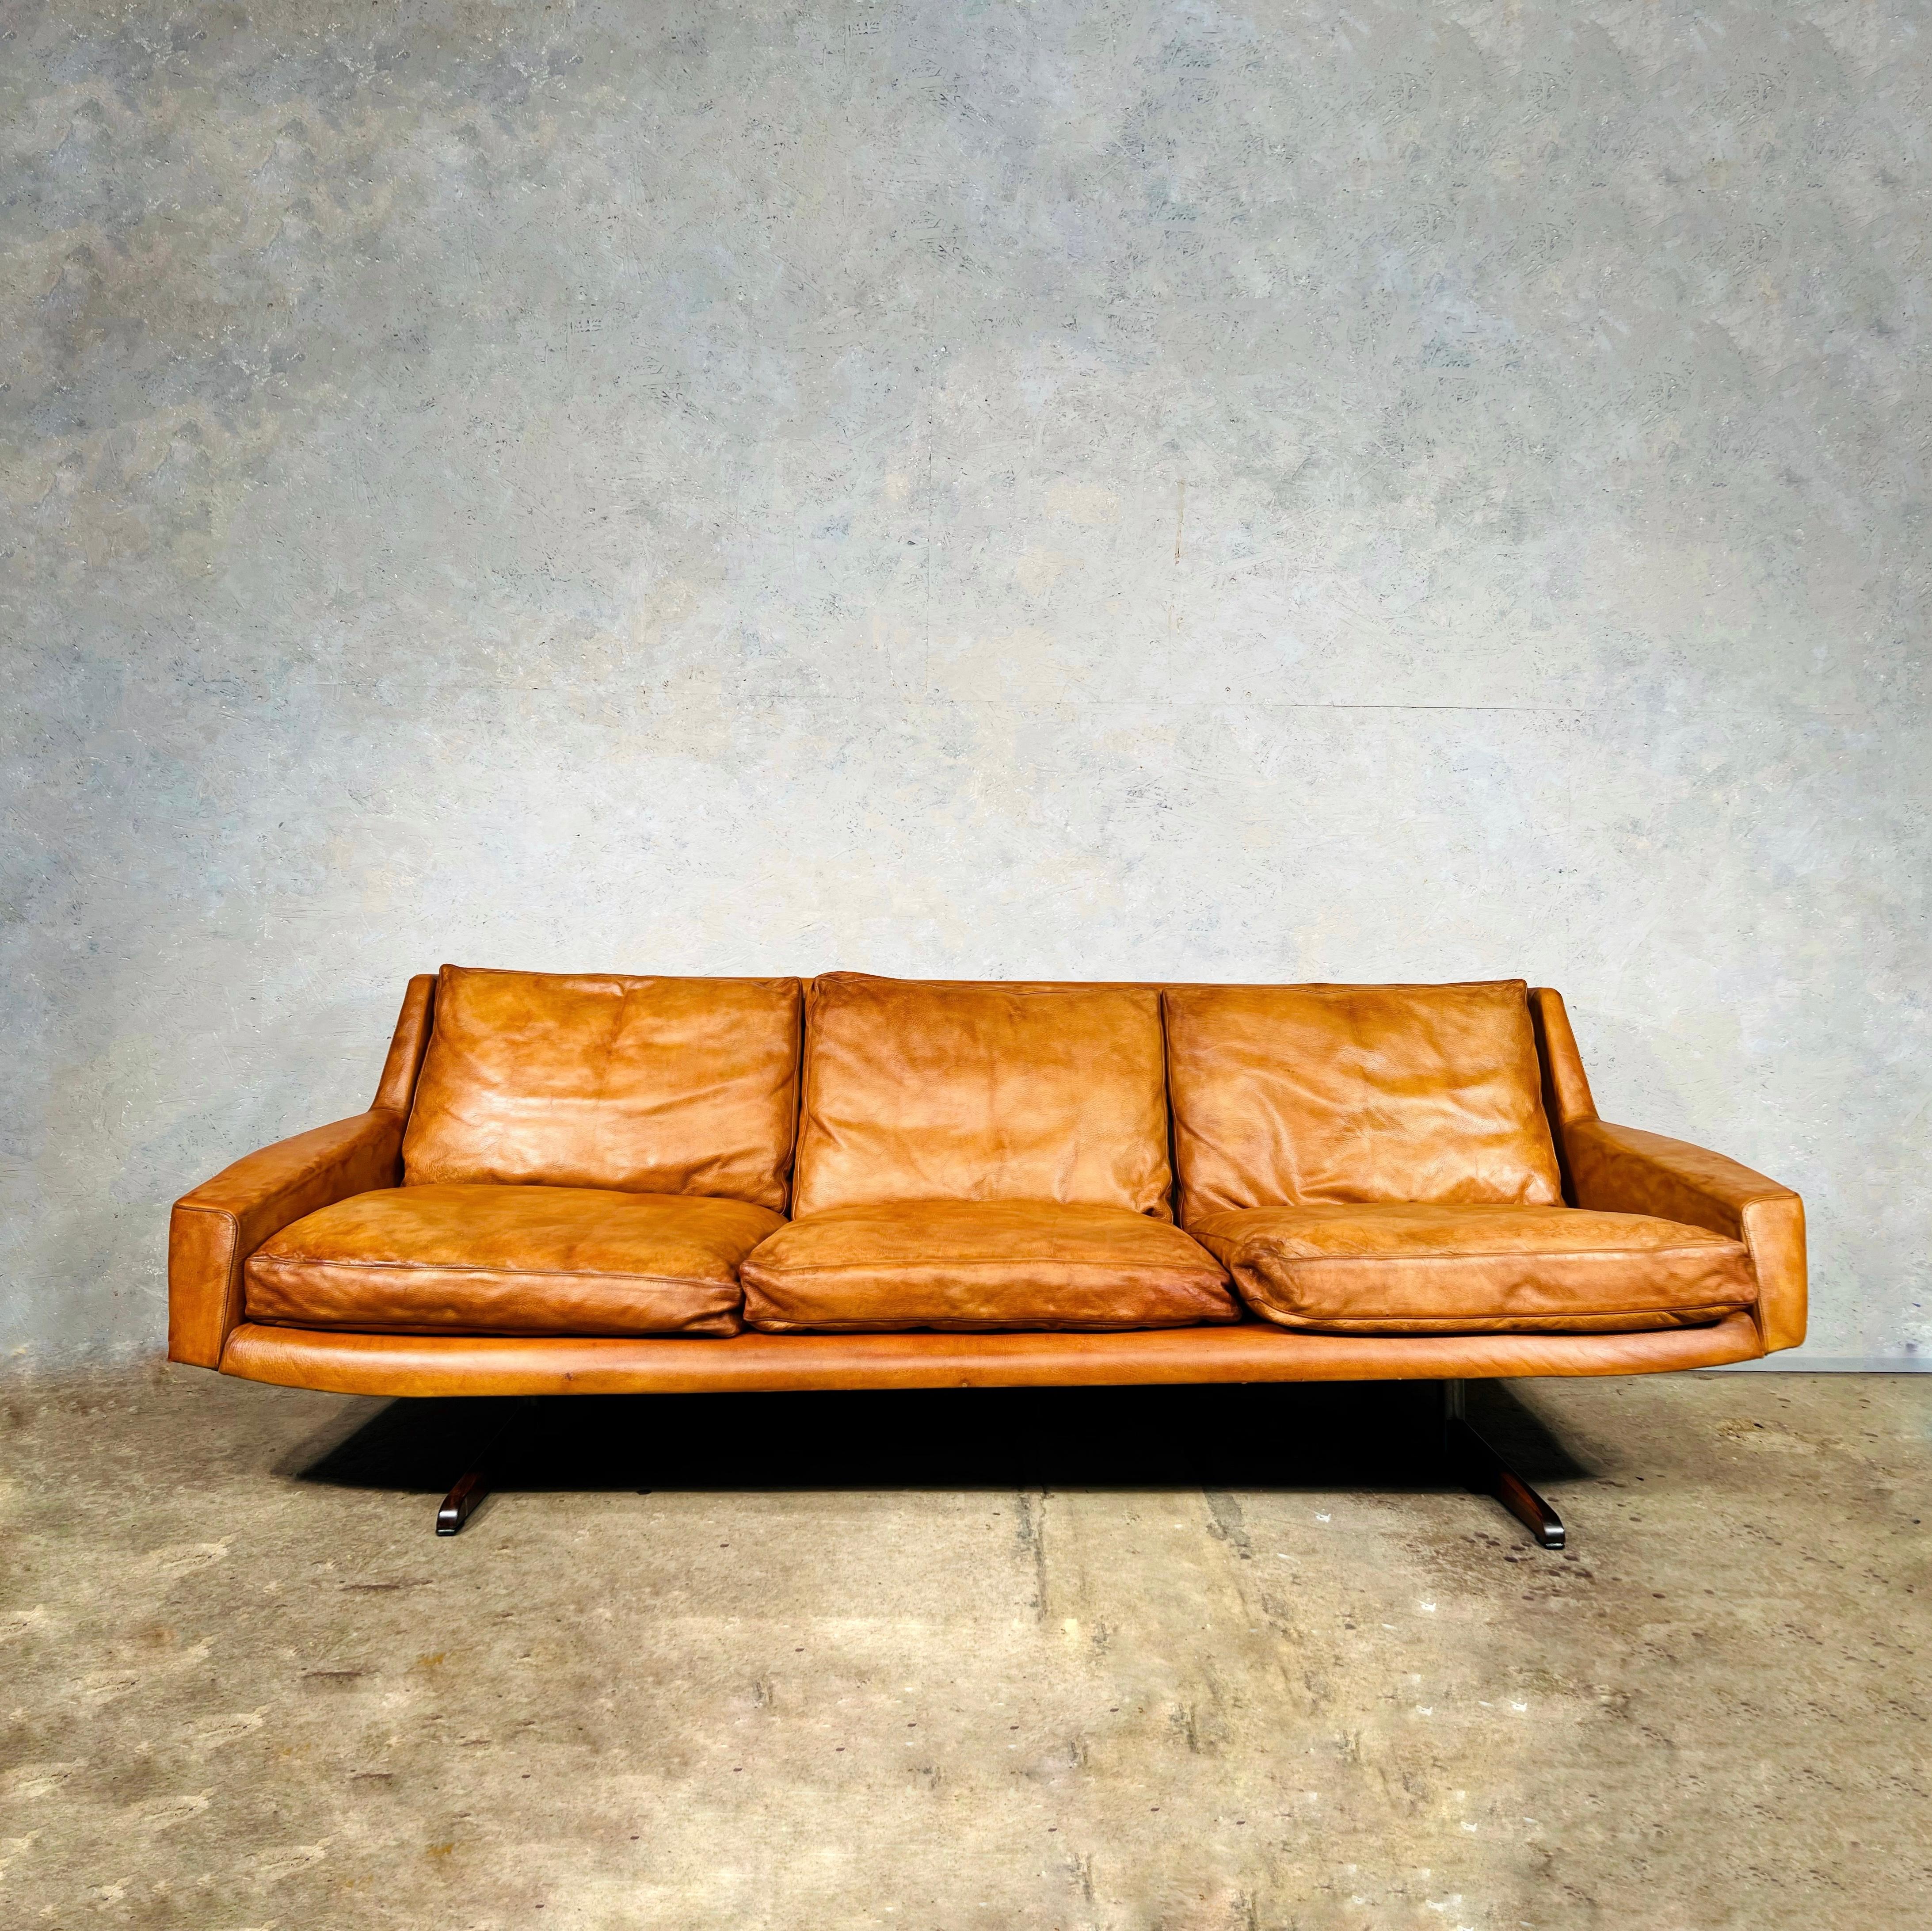 Very Stylish leather sofa designed by Frederik Kayser for Vatne Møbler Norway 1960.

Seriously cool sofa featured in the James Bond movie “You Only Live Twice” with Sean Connery.

A great Design, beautiful lines, sitting on solid Brazilian